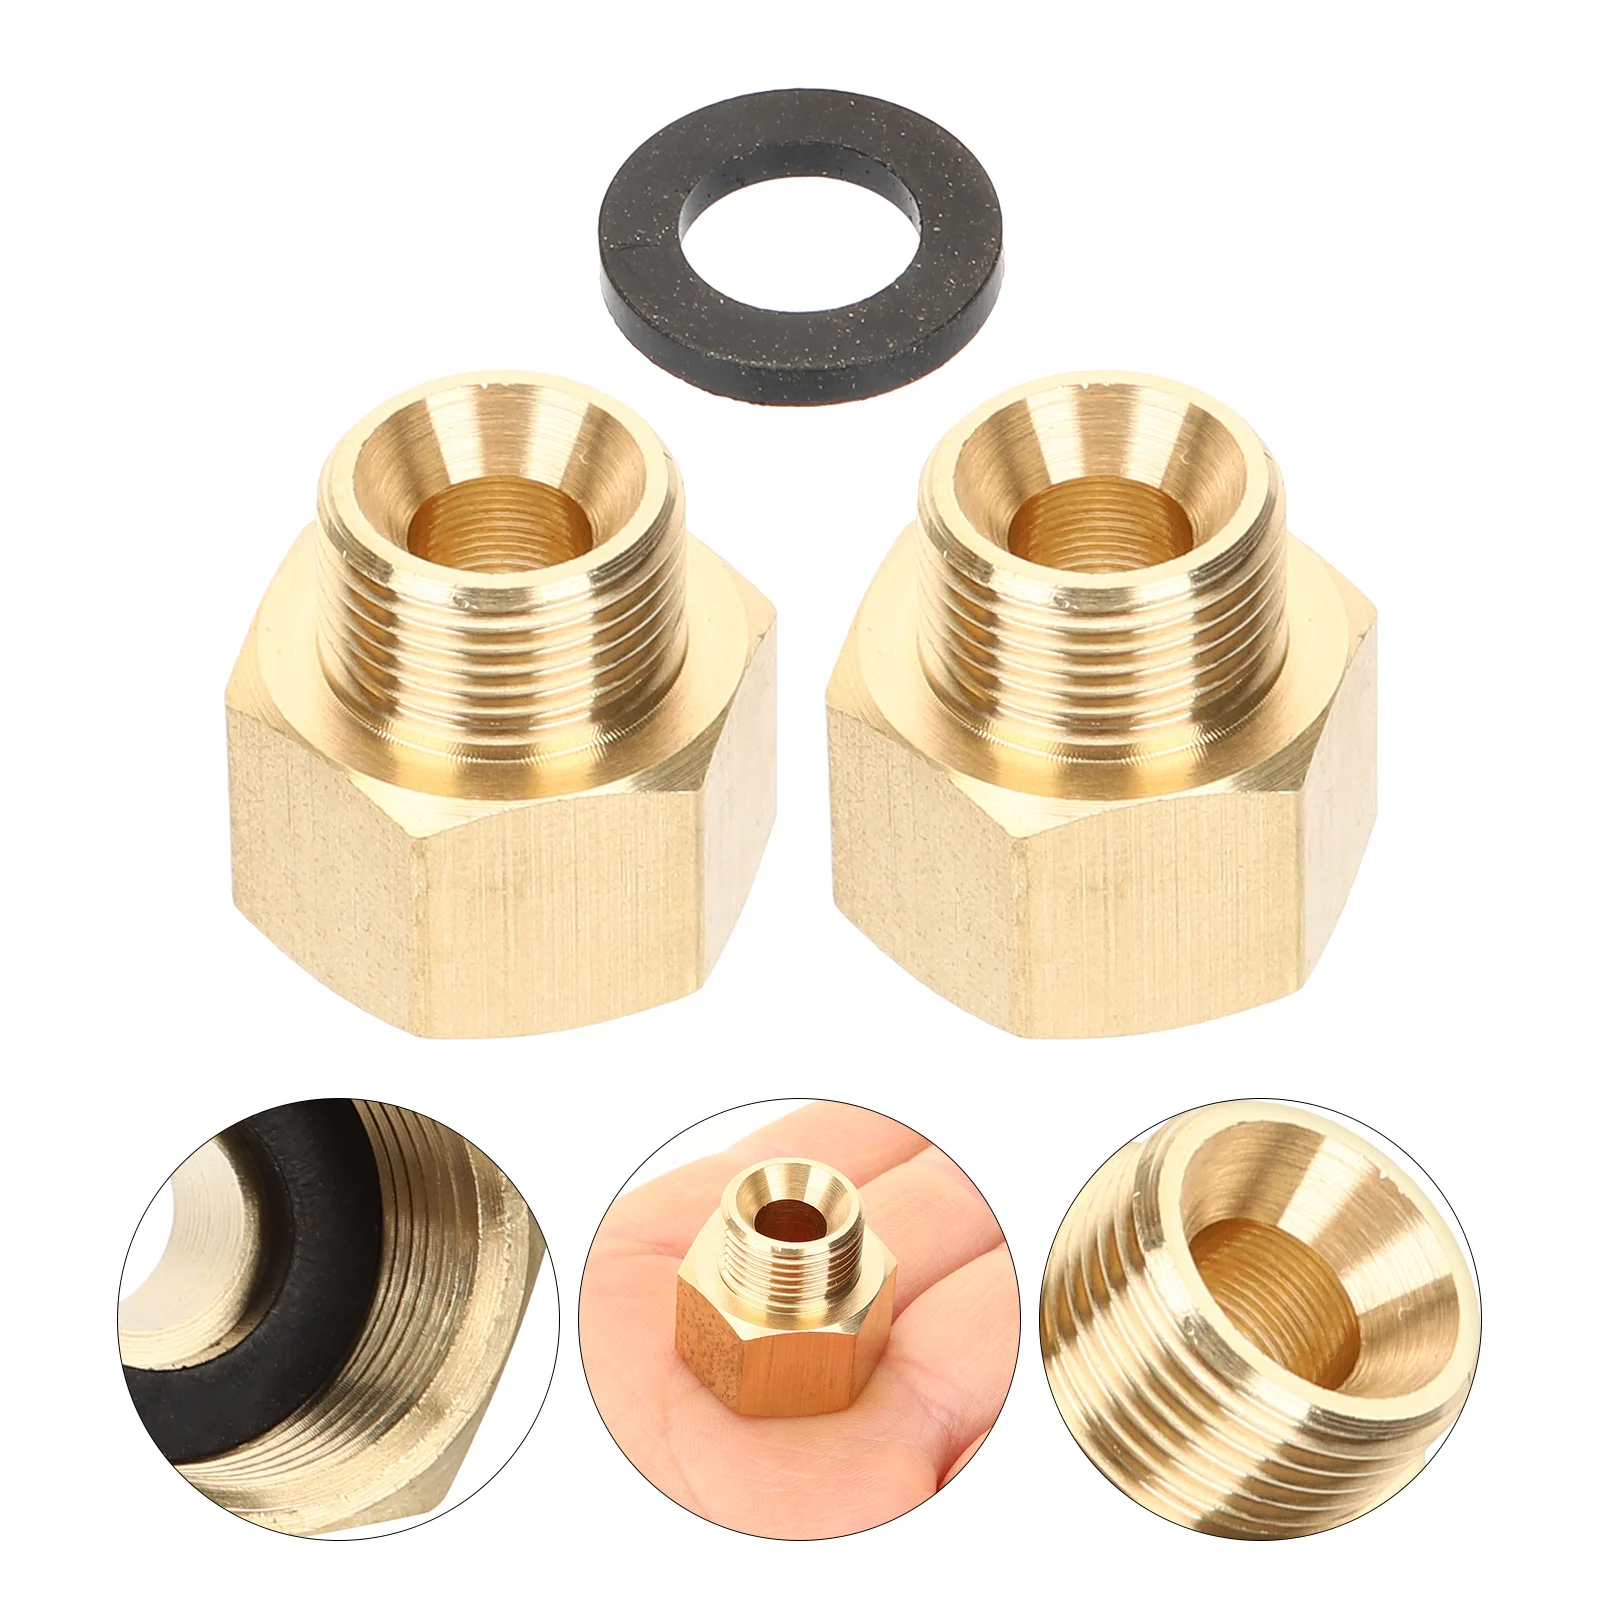 

Fittings Fitting Hose Propane Adapter Reducer Connector Garden Coupling Gas Extension Adapters Tools Coupler Air Bushing